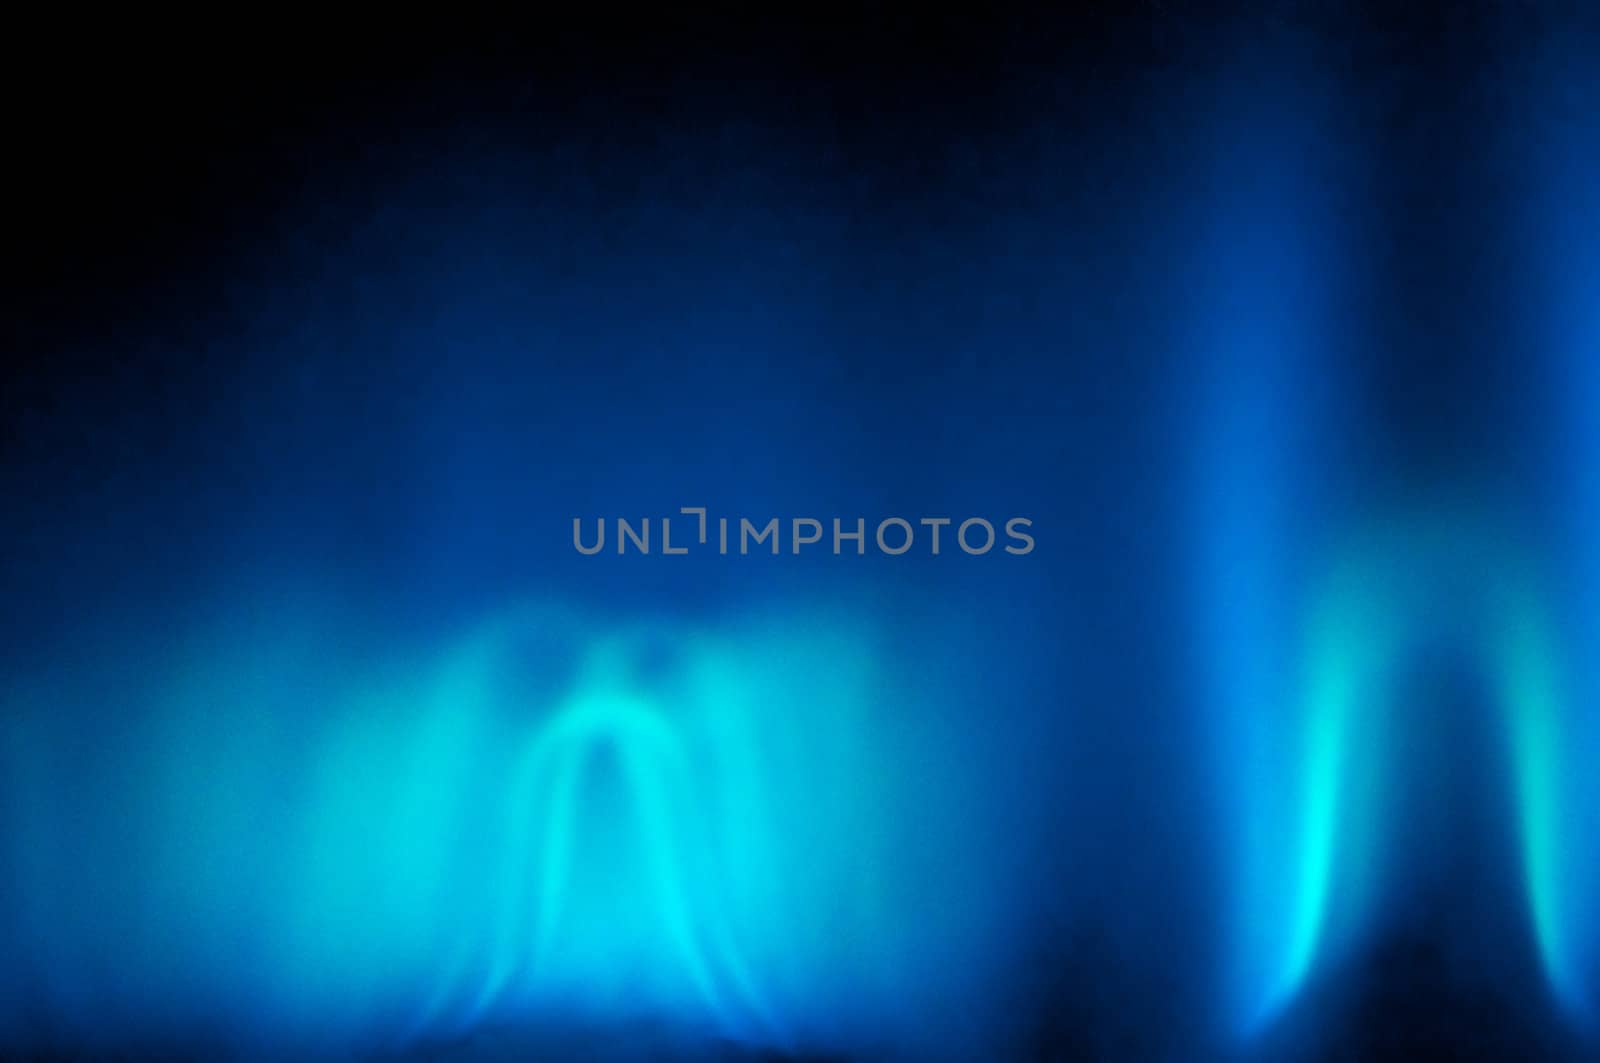 An abstract shot of the blue flame of a gas heater.